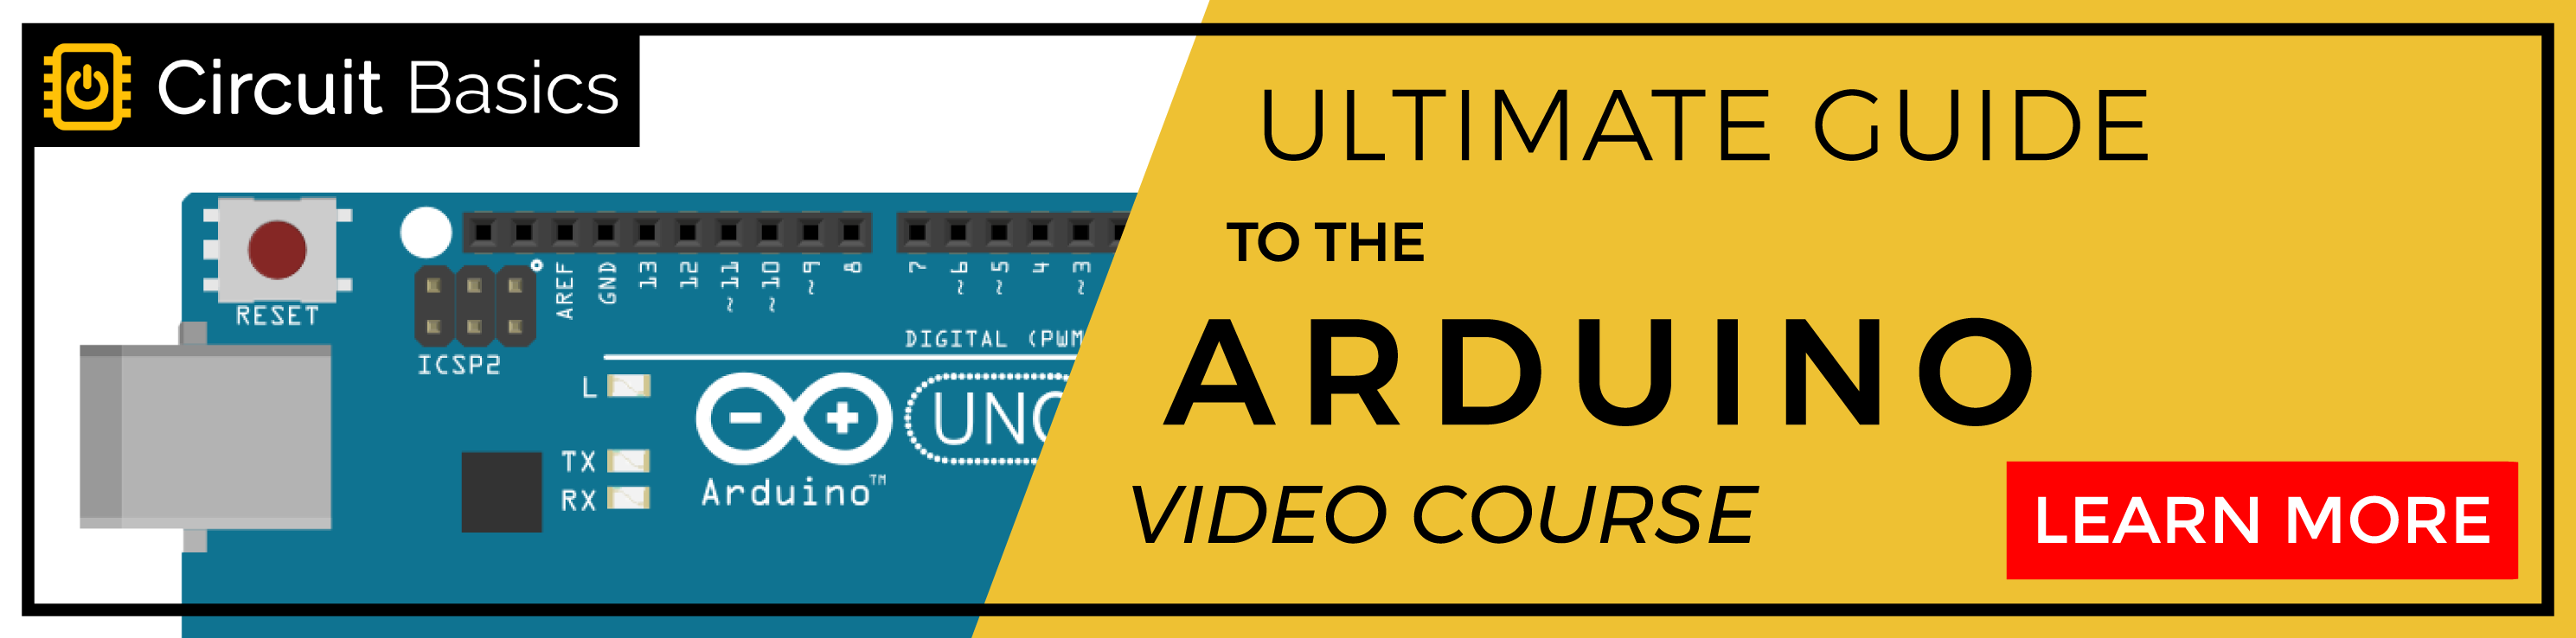 Ultimate Guide to the Arduino Course BANNER NEW